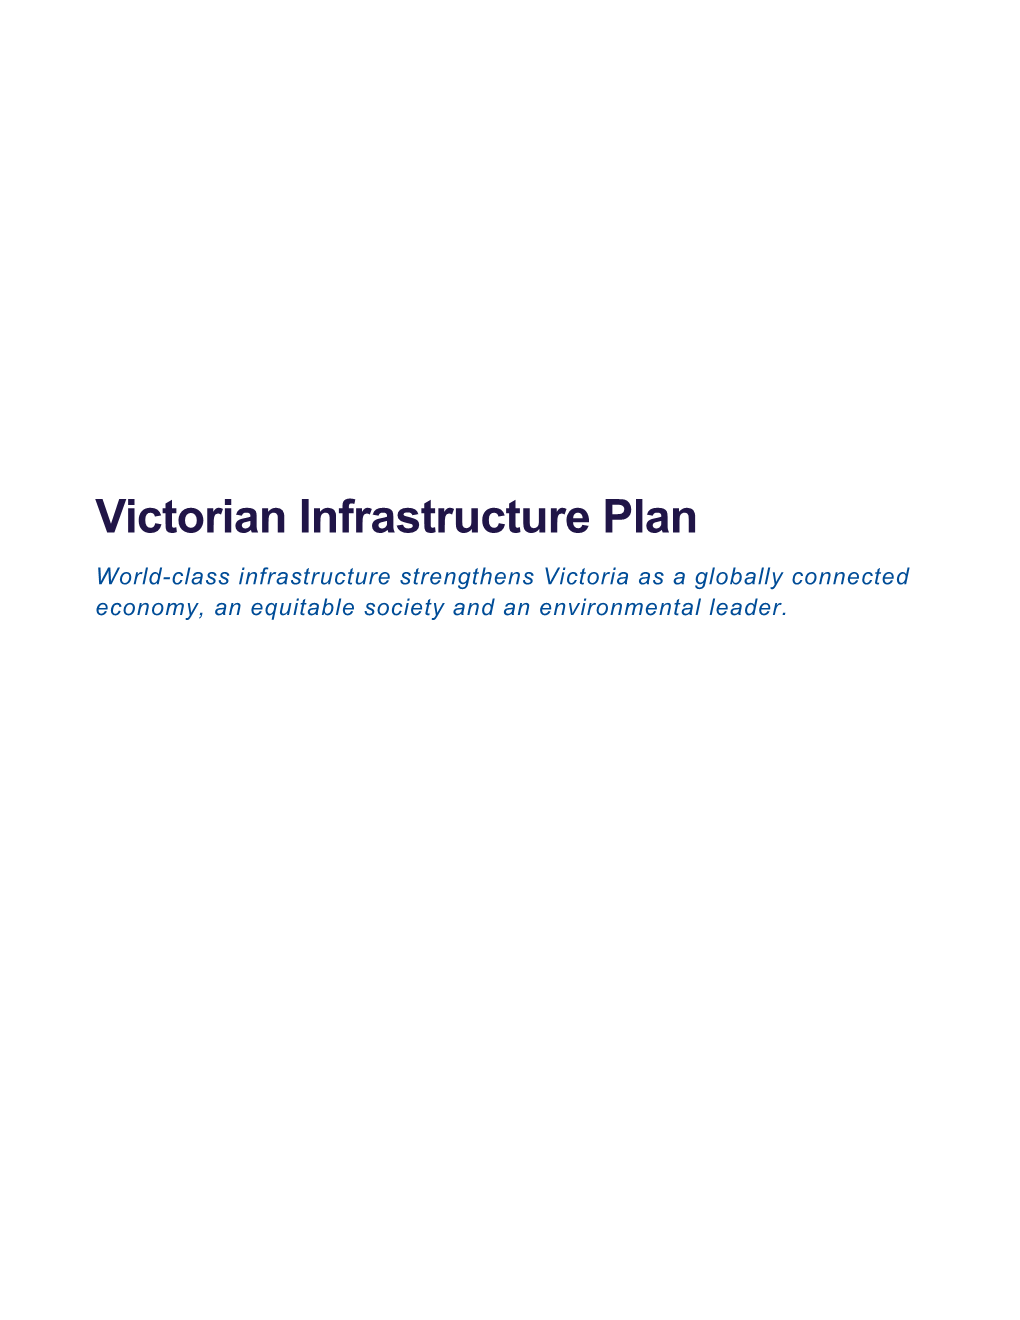 Information in This Document Is Available at the Victorian Infrastructure Plan Website